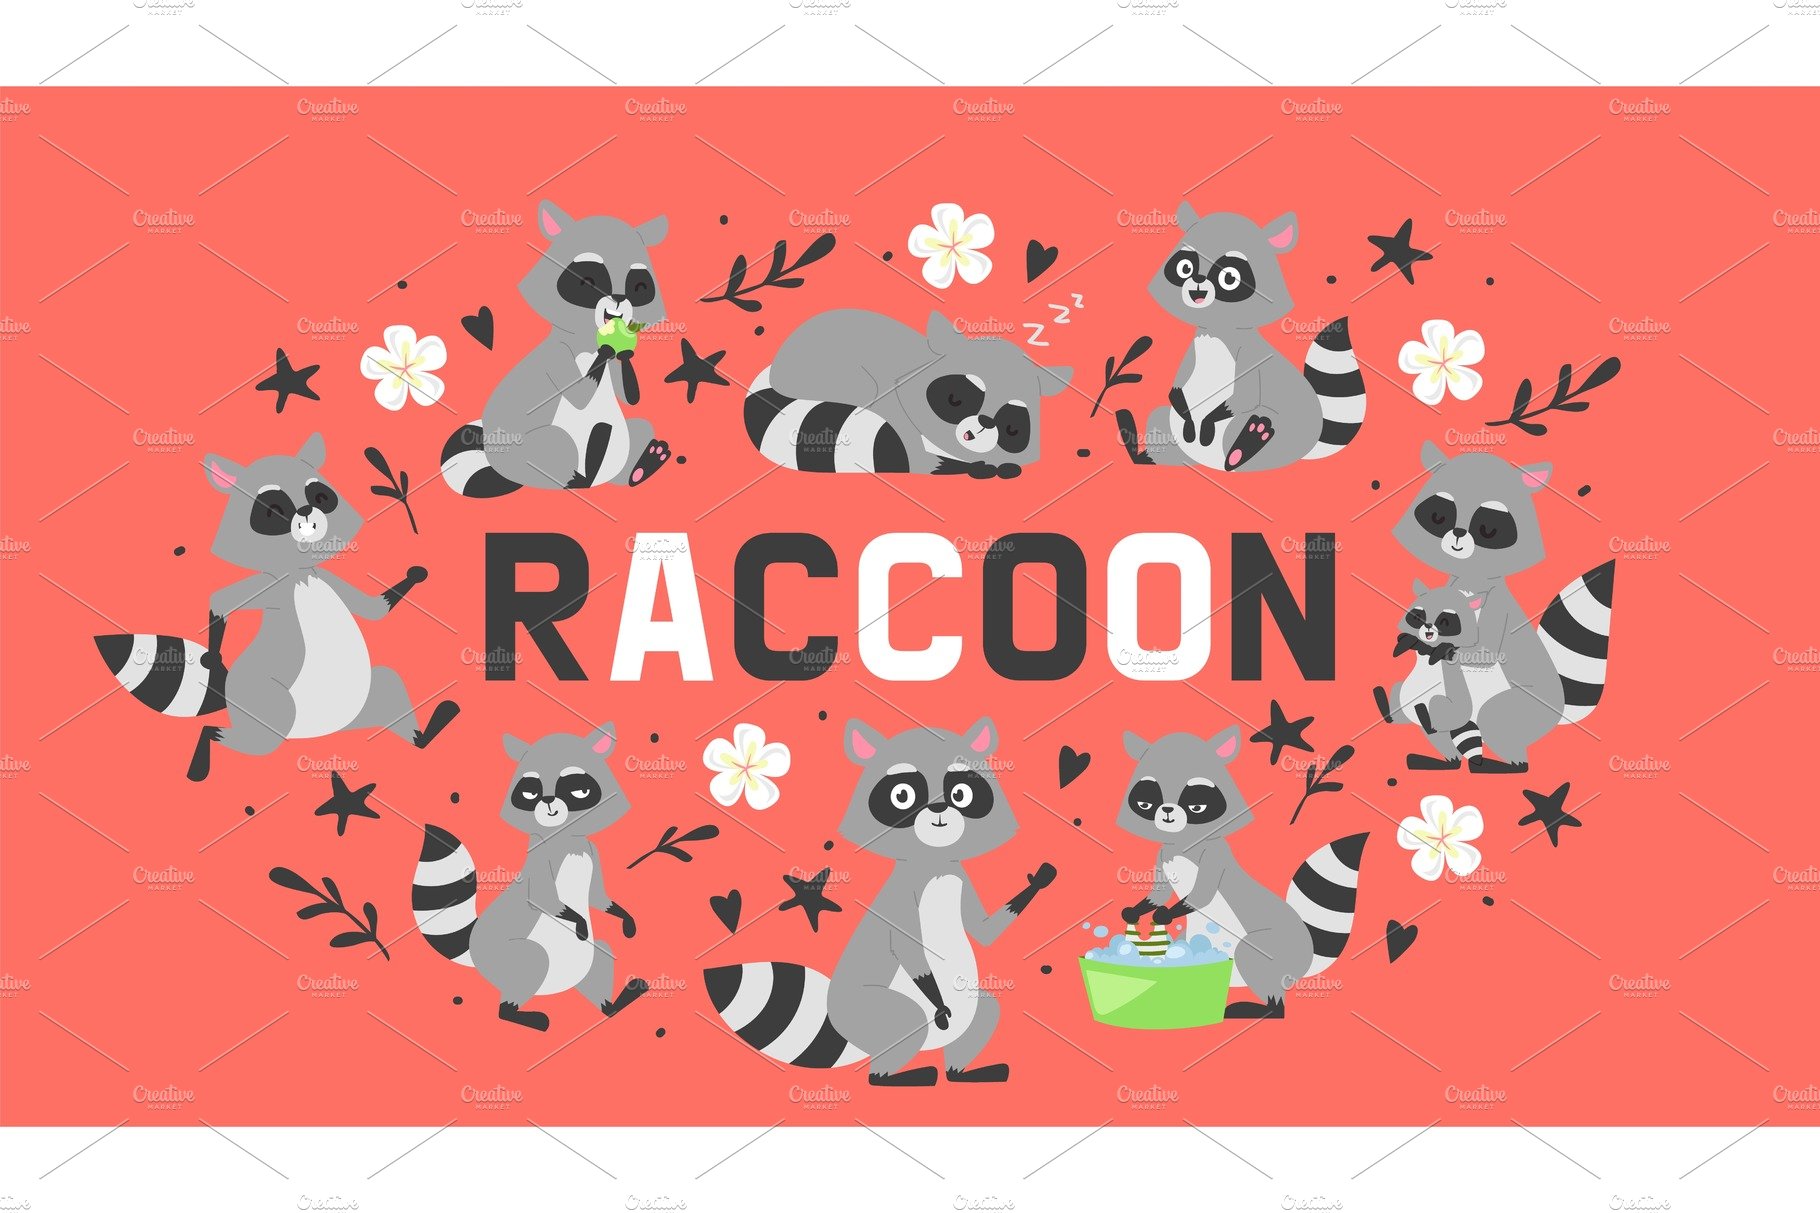 Raccoon in different positions doing cover image.